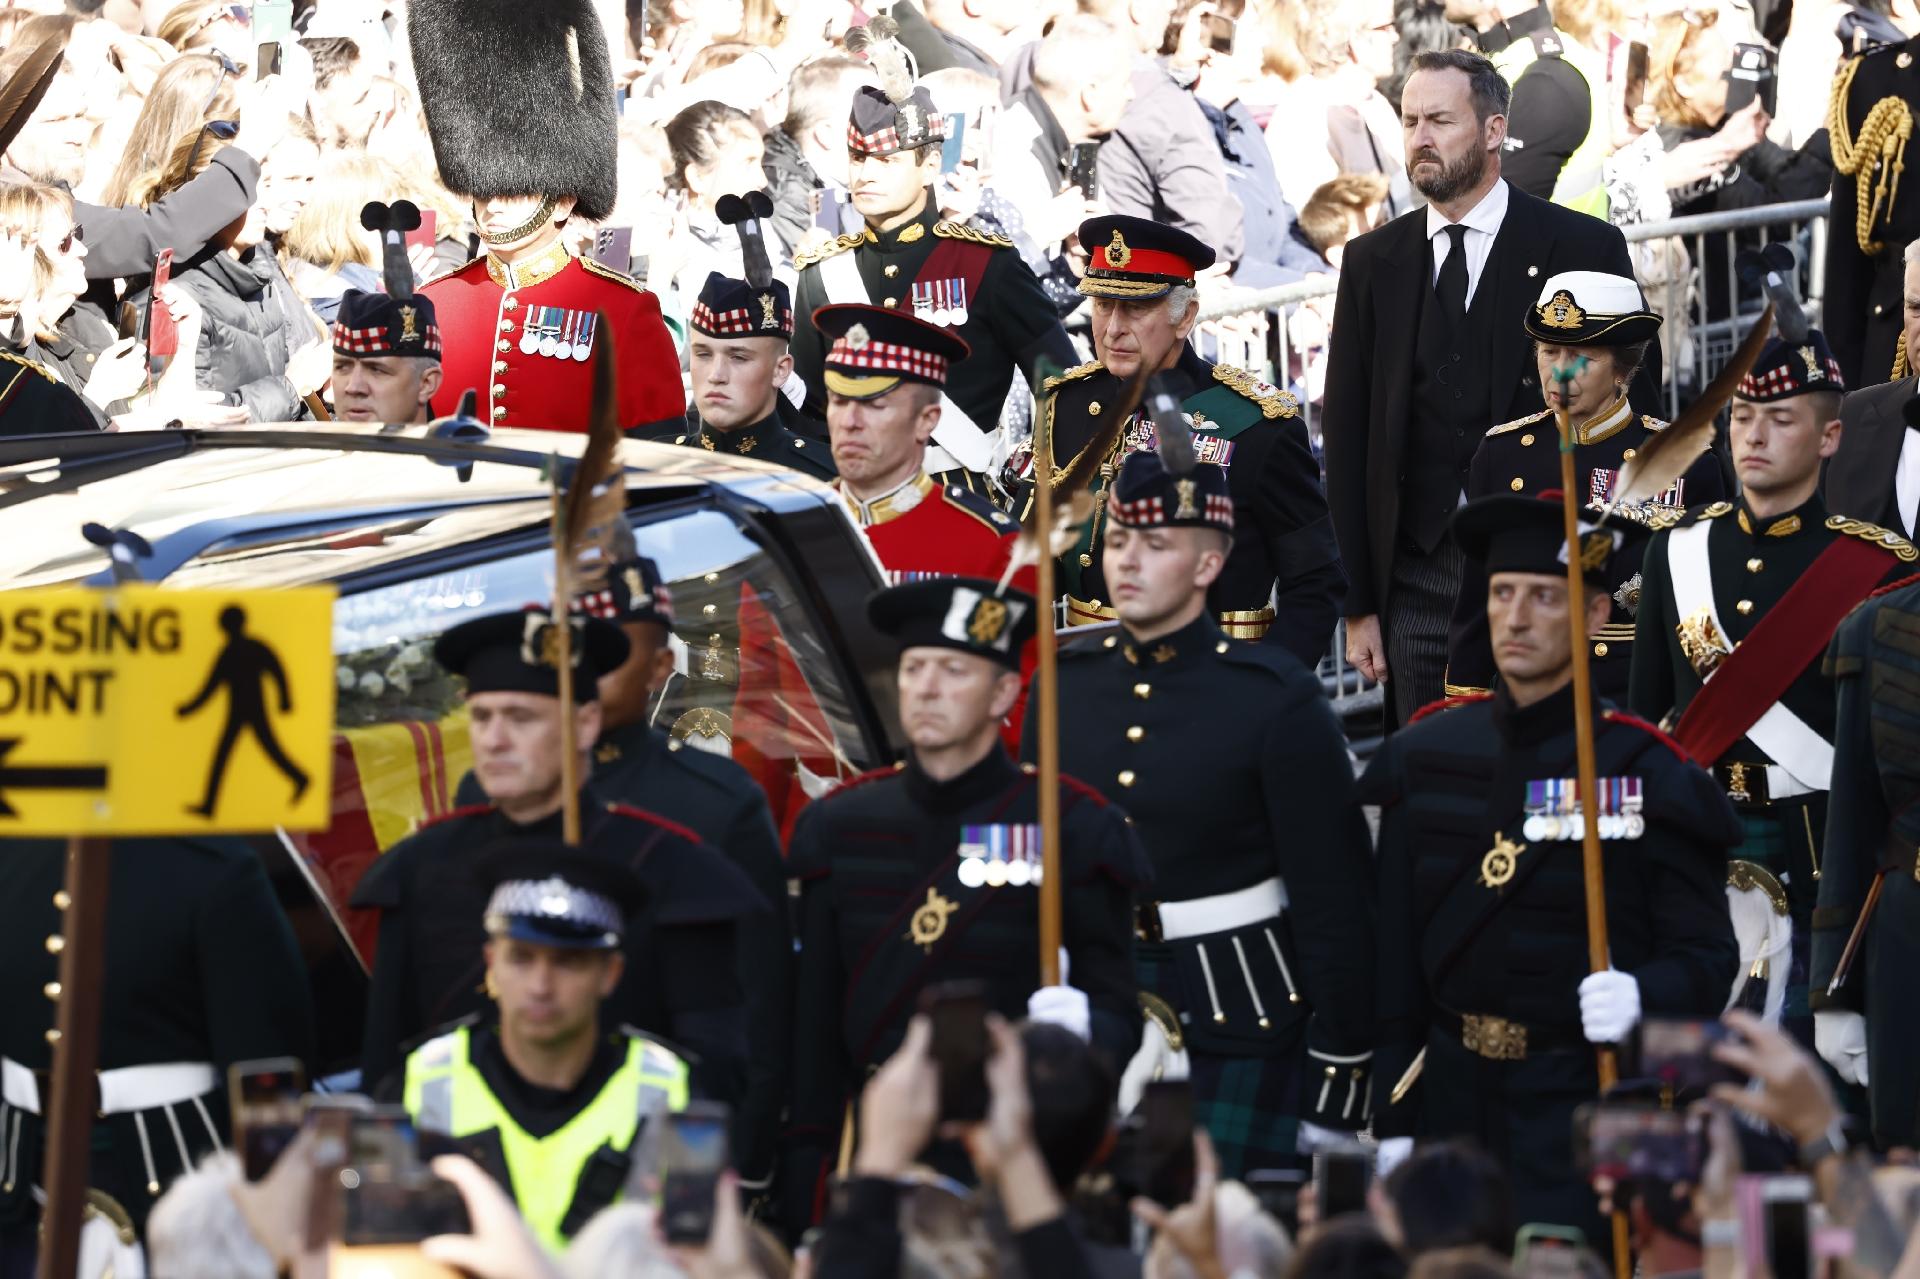     Queen Elizabeth: The Monarch's body leaves in procession - Jeff J Mitchell/Getty Images